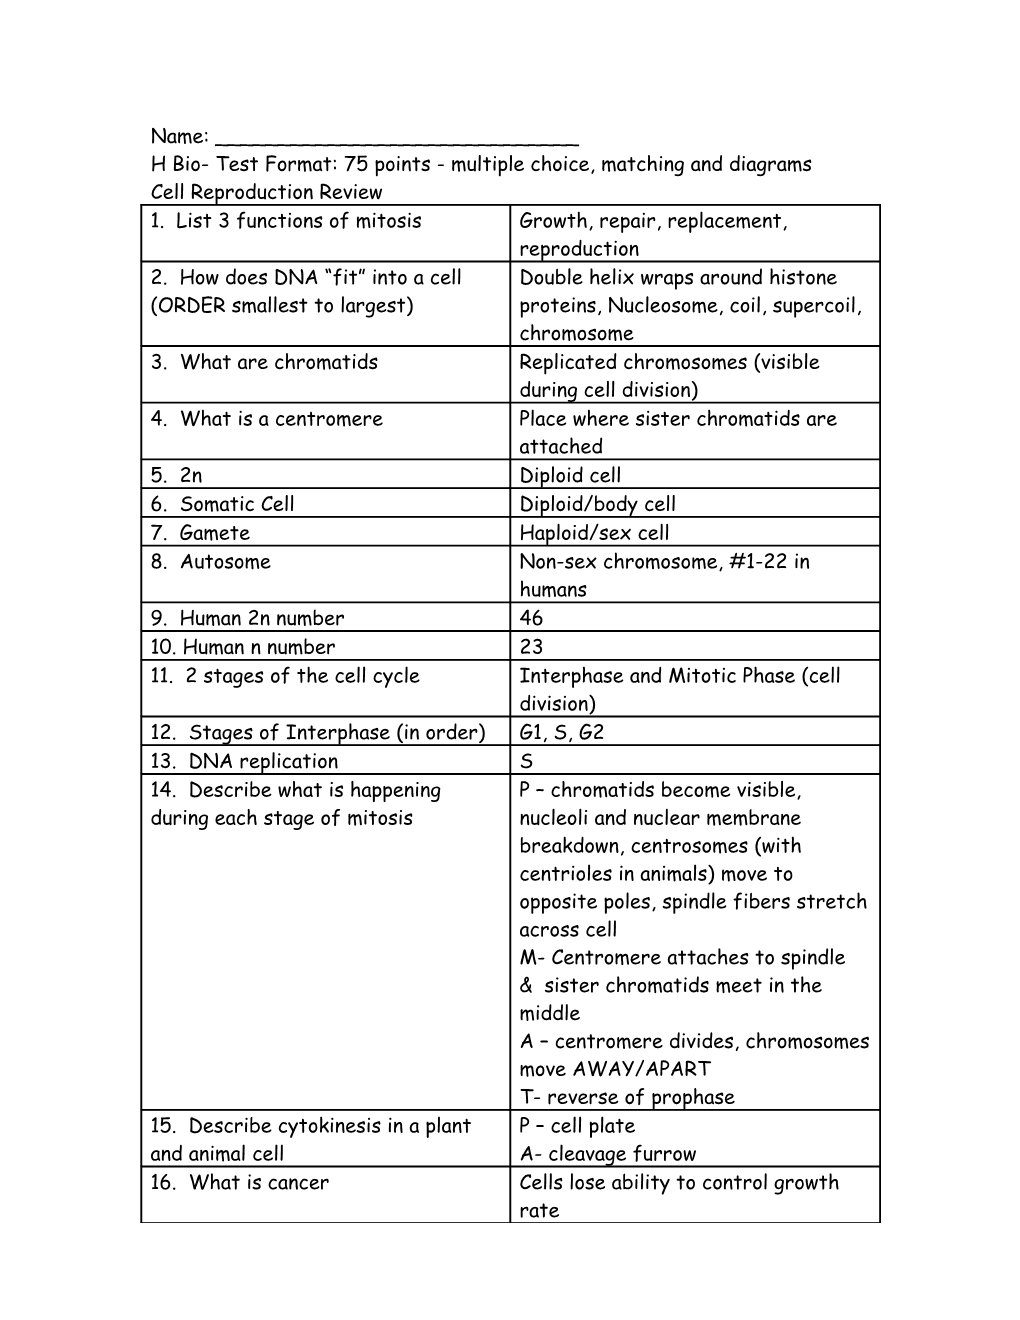 H Bio- Test Format: 75 Points - Multiple Choice, Matching and Diagrams